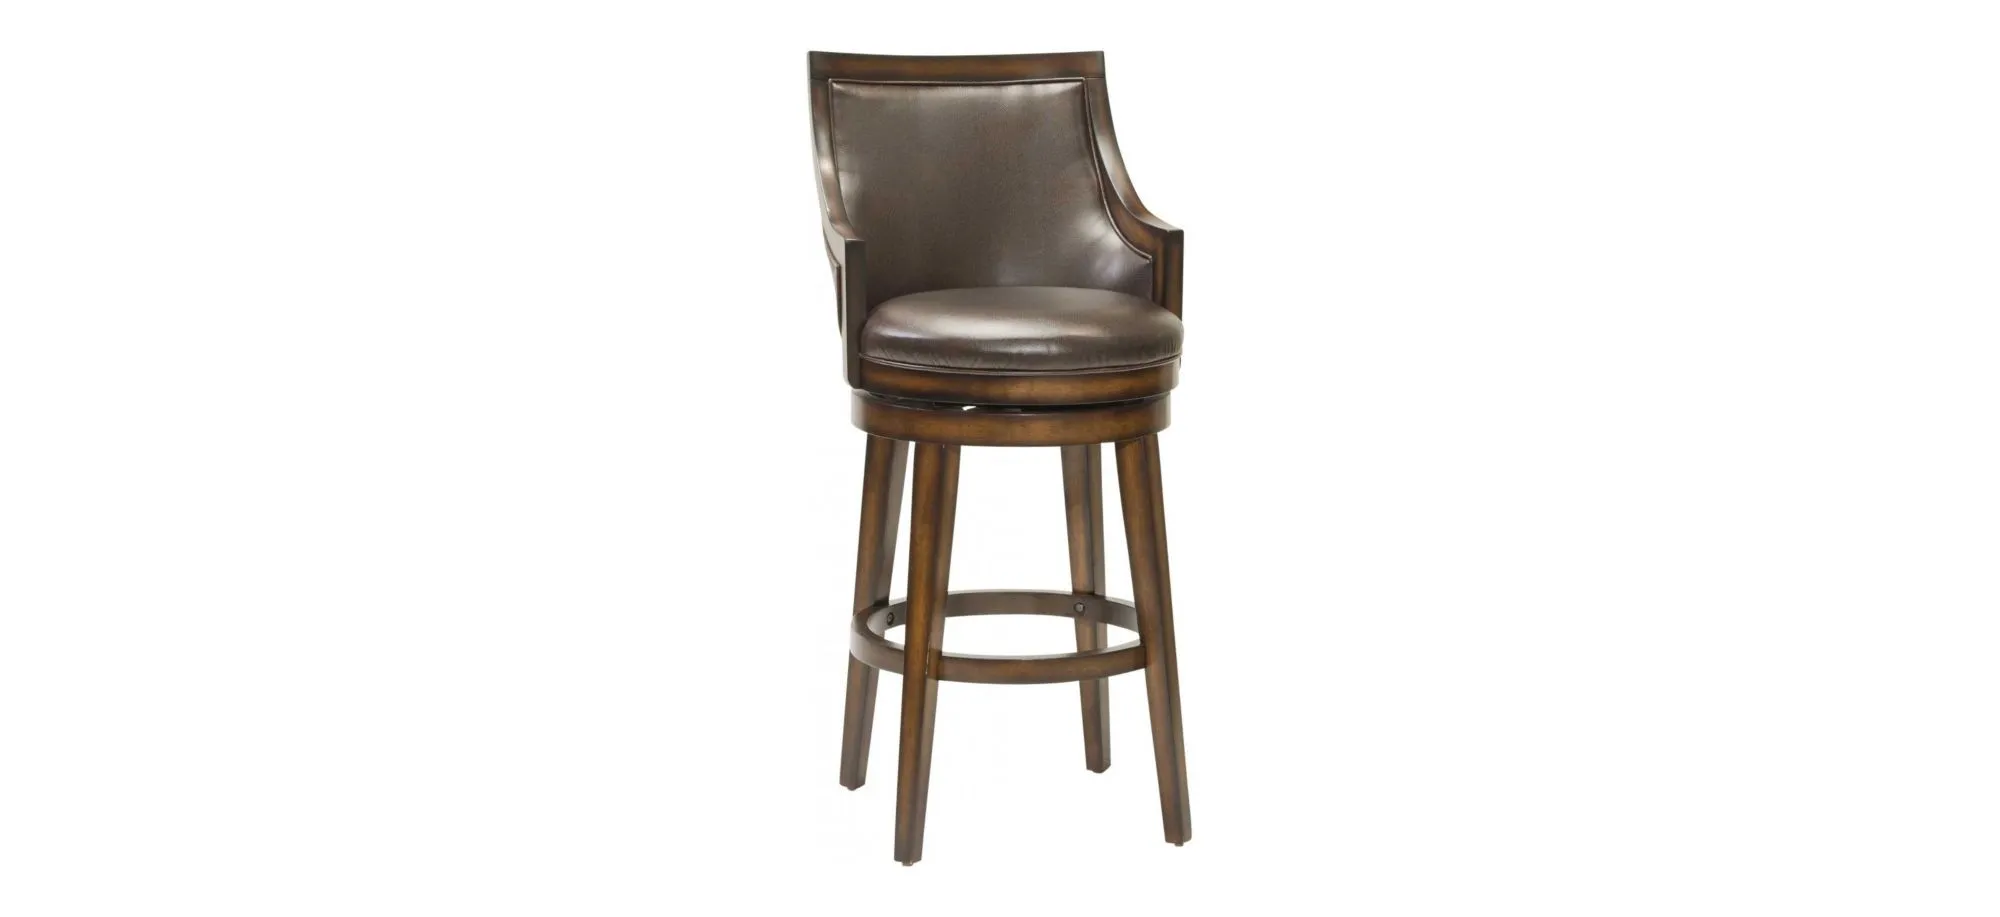 Lyman Swivel Counter Stool in Brown by Hillsdale Furniture